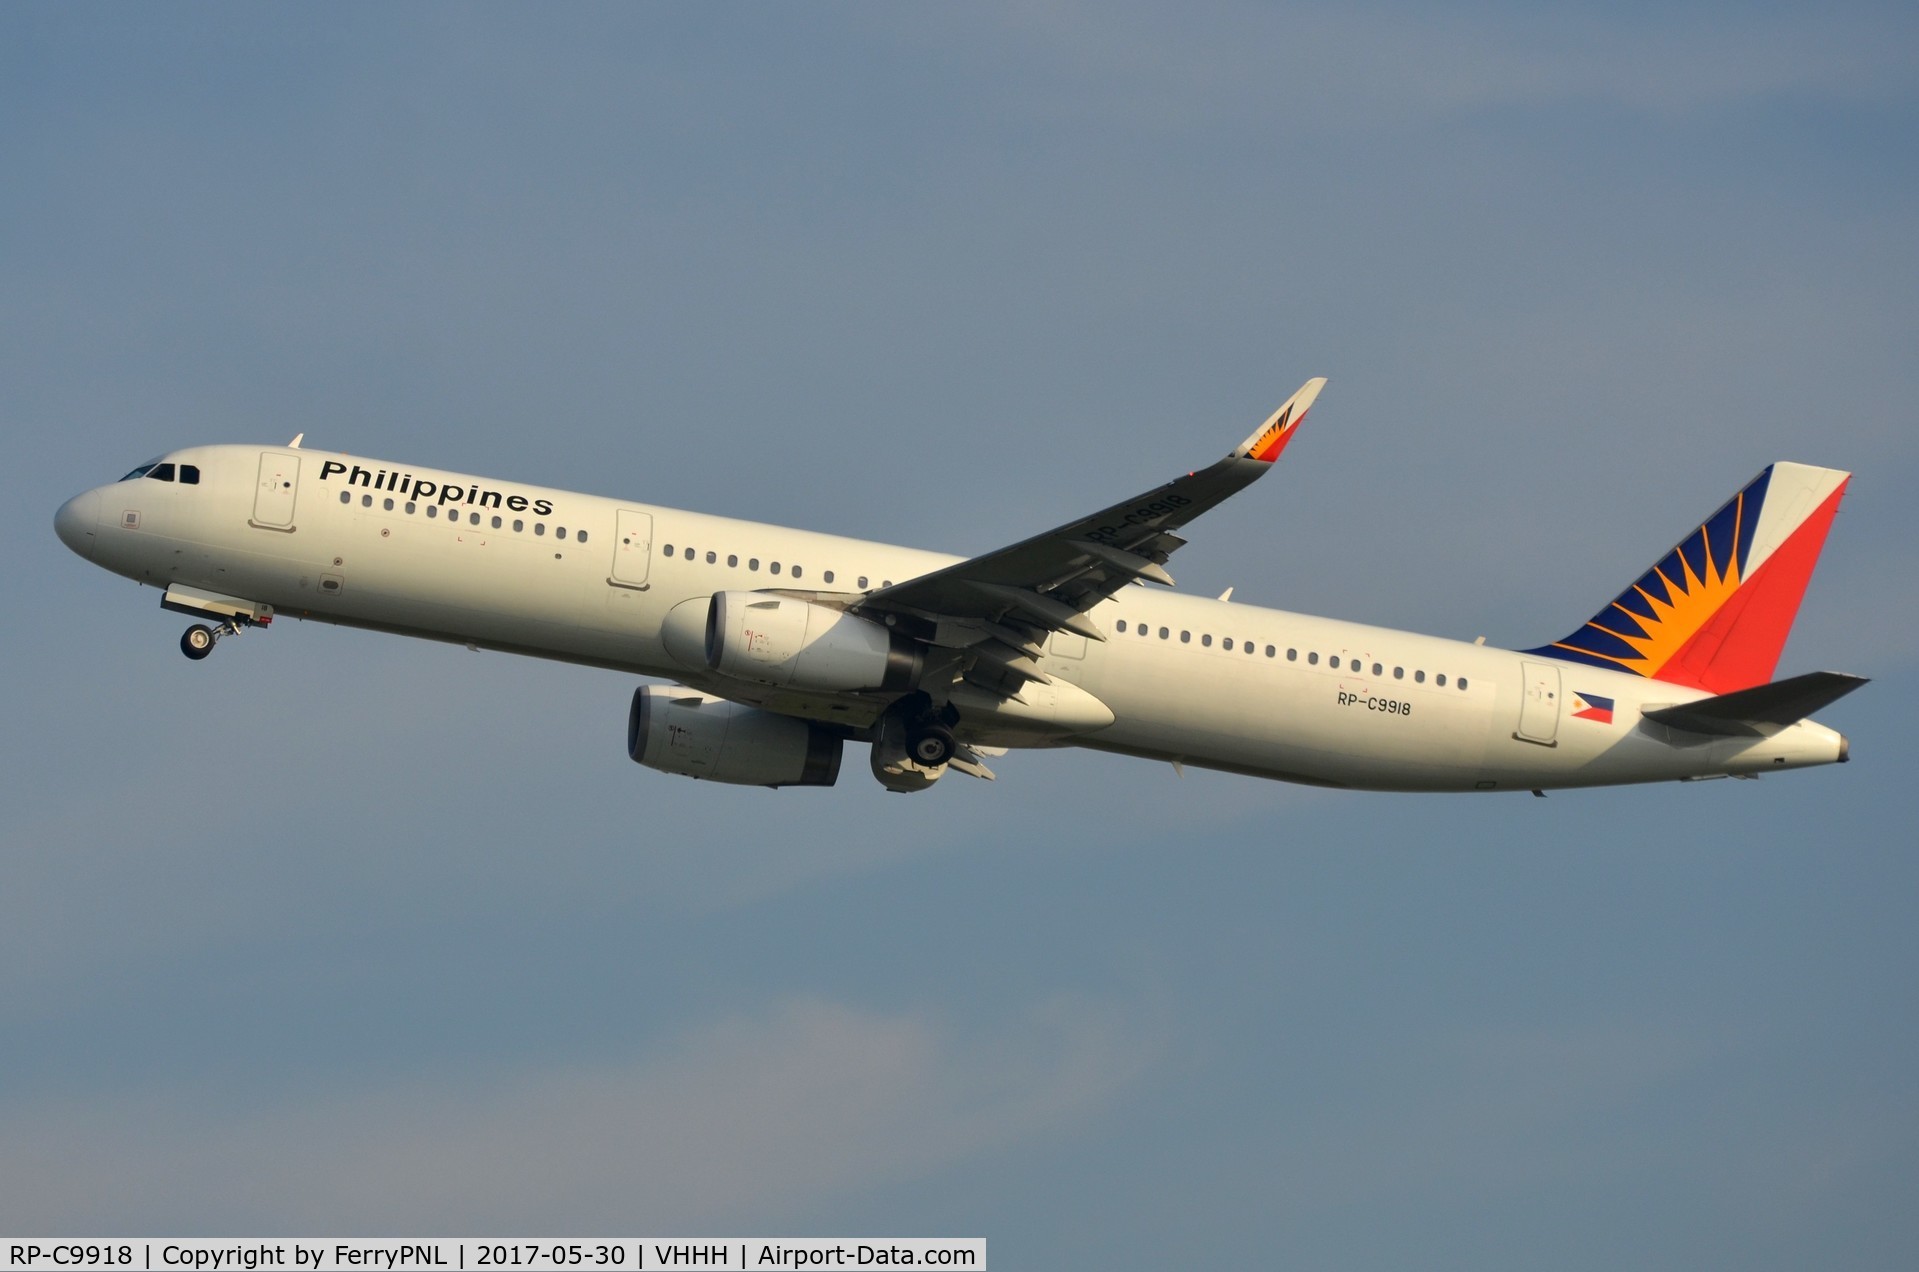 RP-C9918, 2015 Airbus A321-231 C/N 6493, Departure of Philippines A321